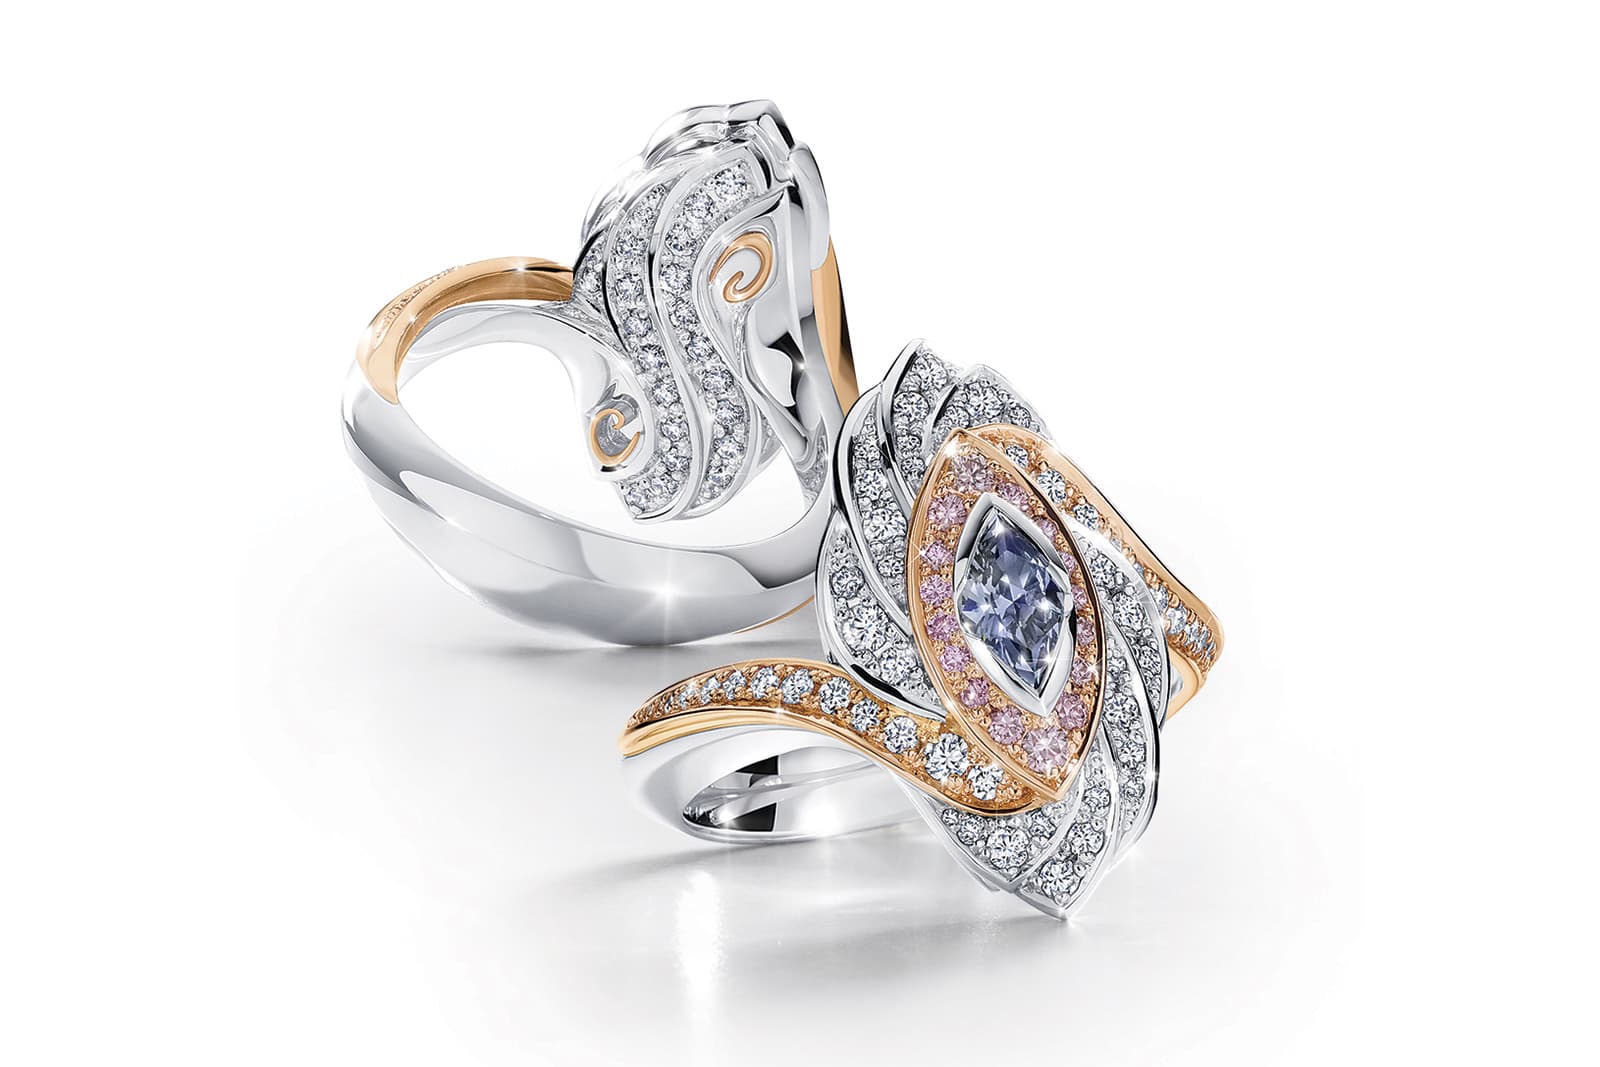 Calleija Couture collection Rayne ring with an Argyle blue marquise diamond, Argyle pink diamonds and colourless diamonds in platinum and rose gold